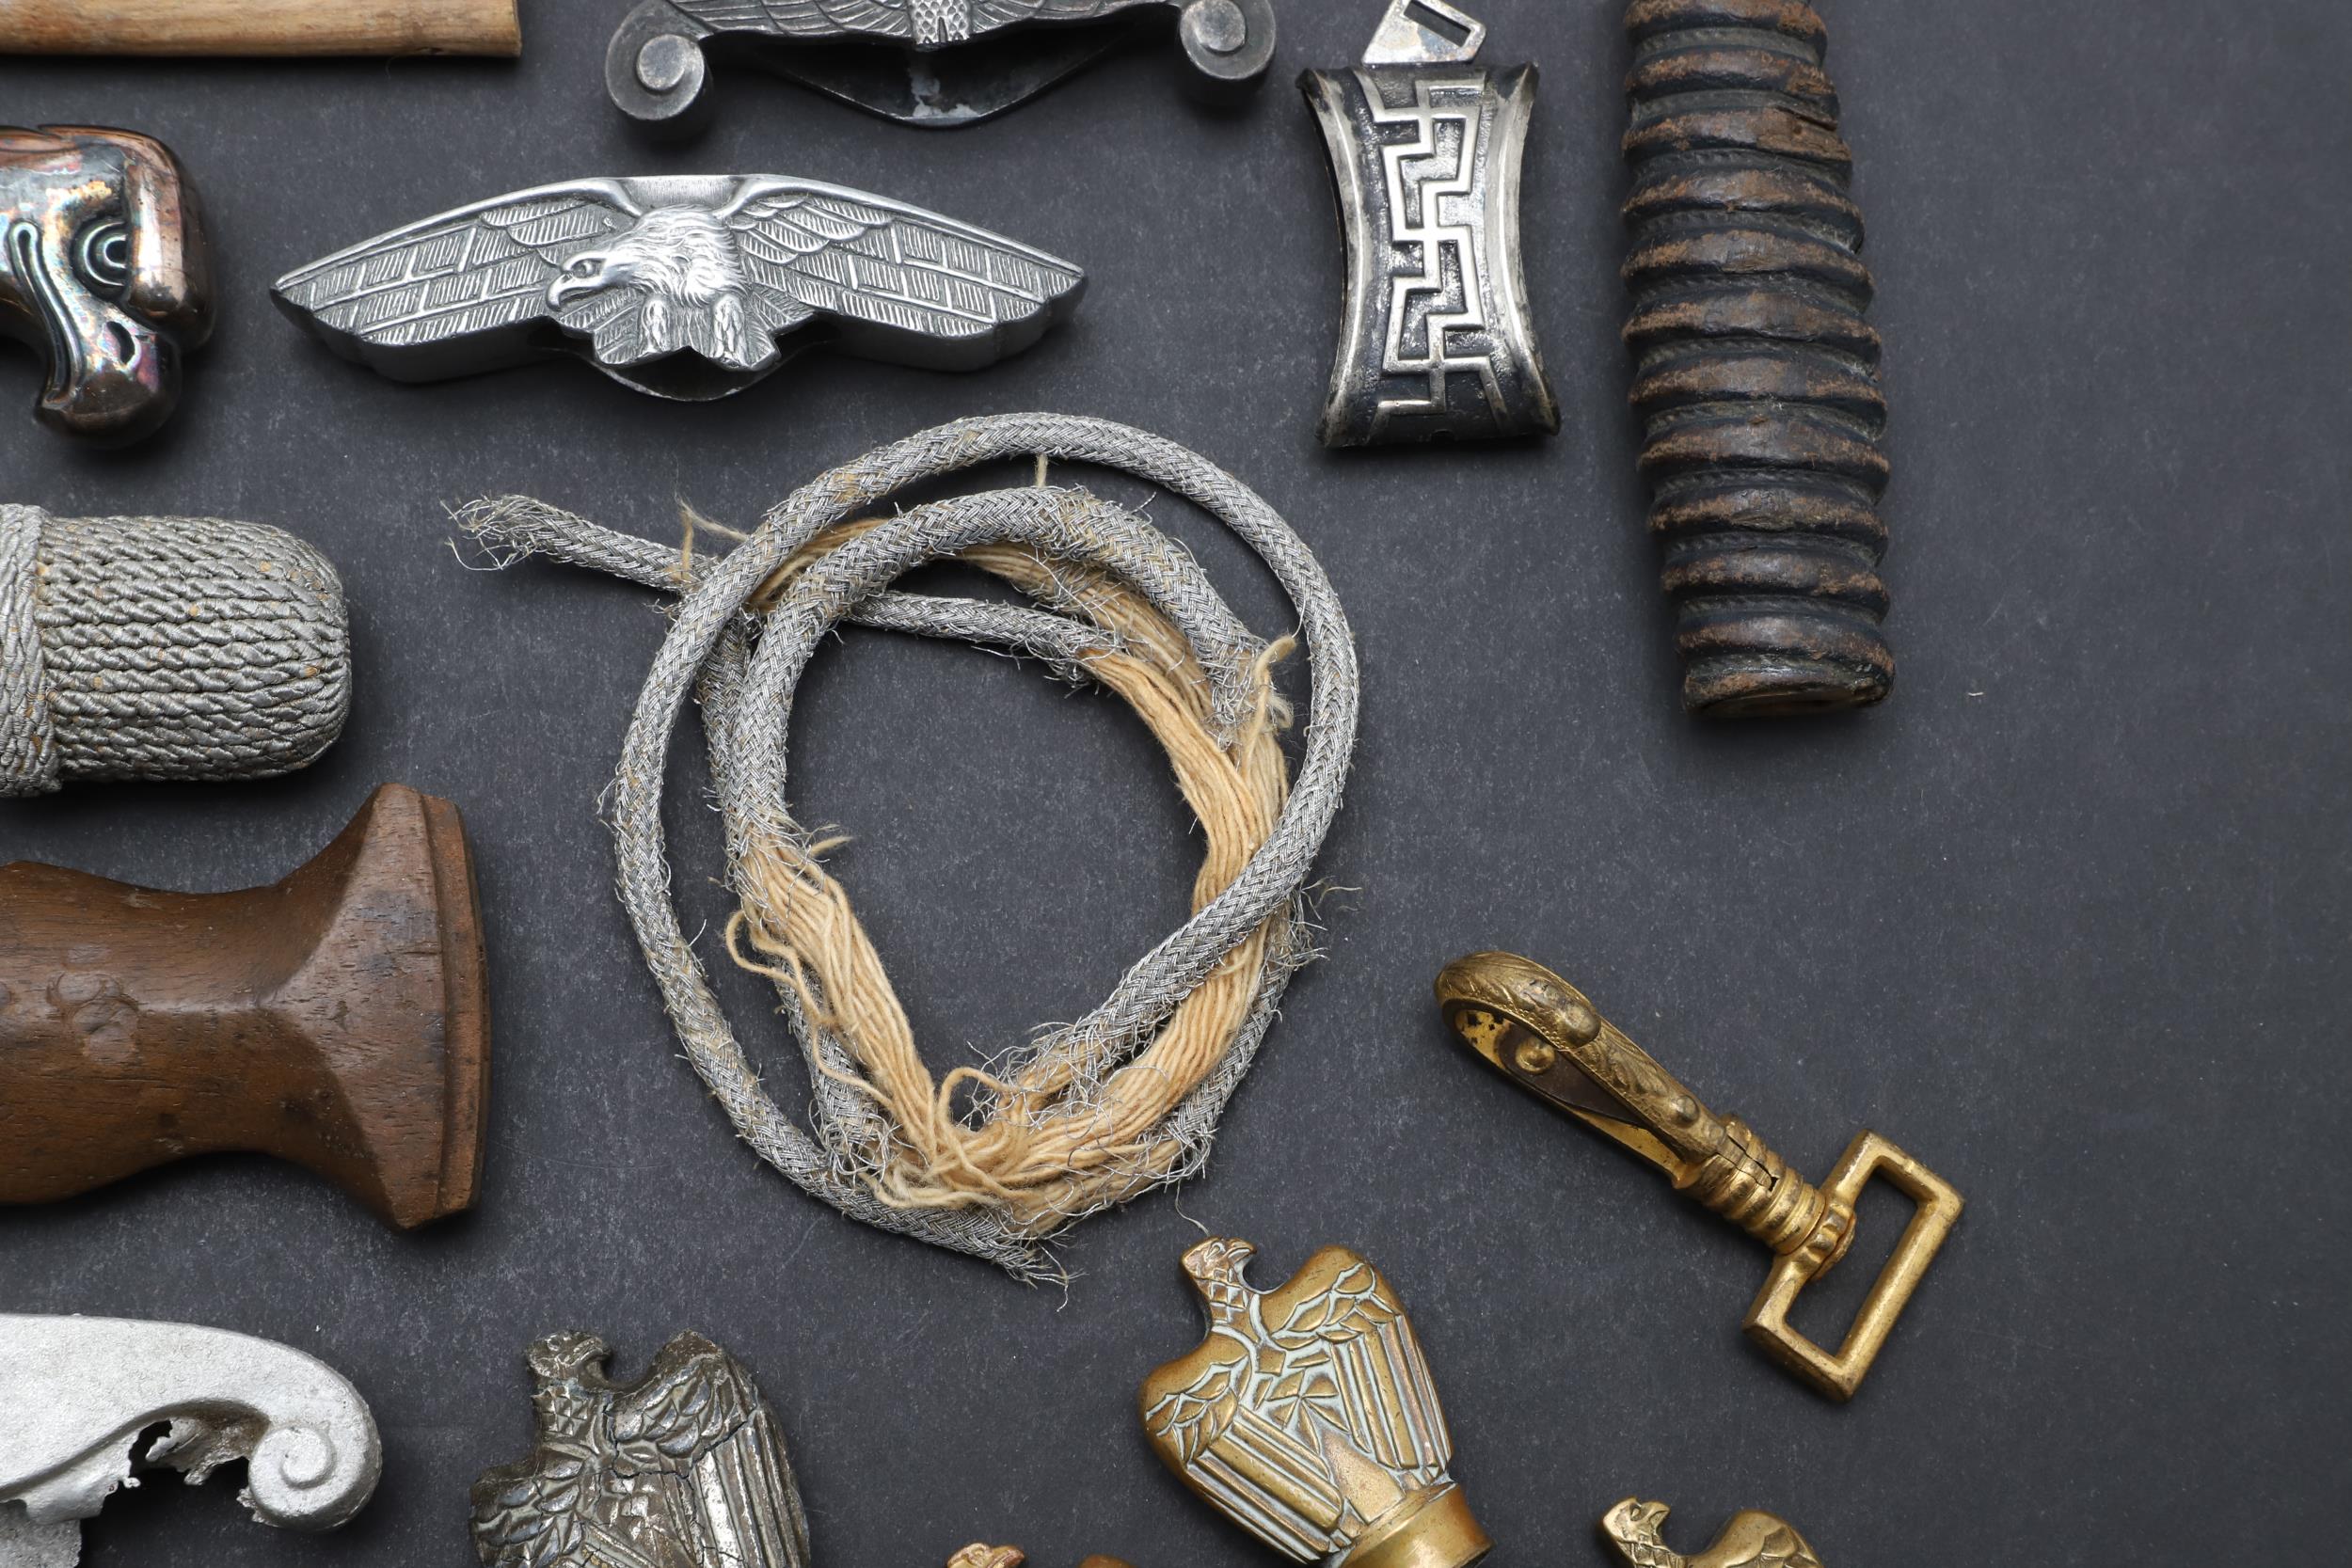 AN INTERESTING AND USEFUL COLLECTION OF SECOND WORLD WAR GERMAN DAGGER PARTS. - Image 4 of 14